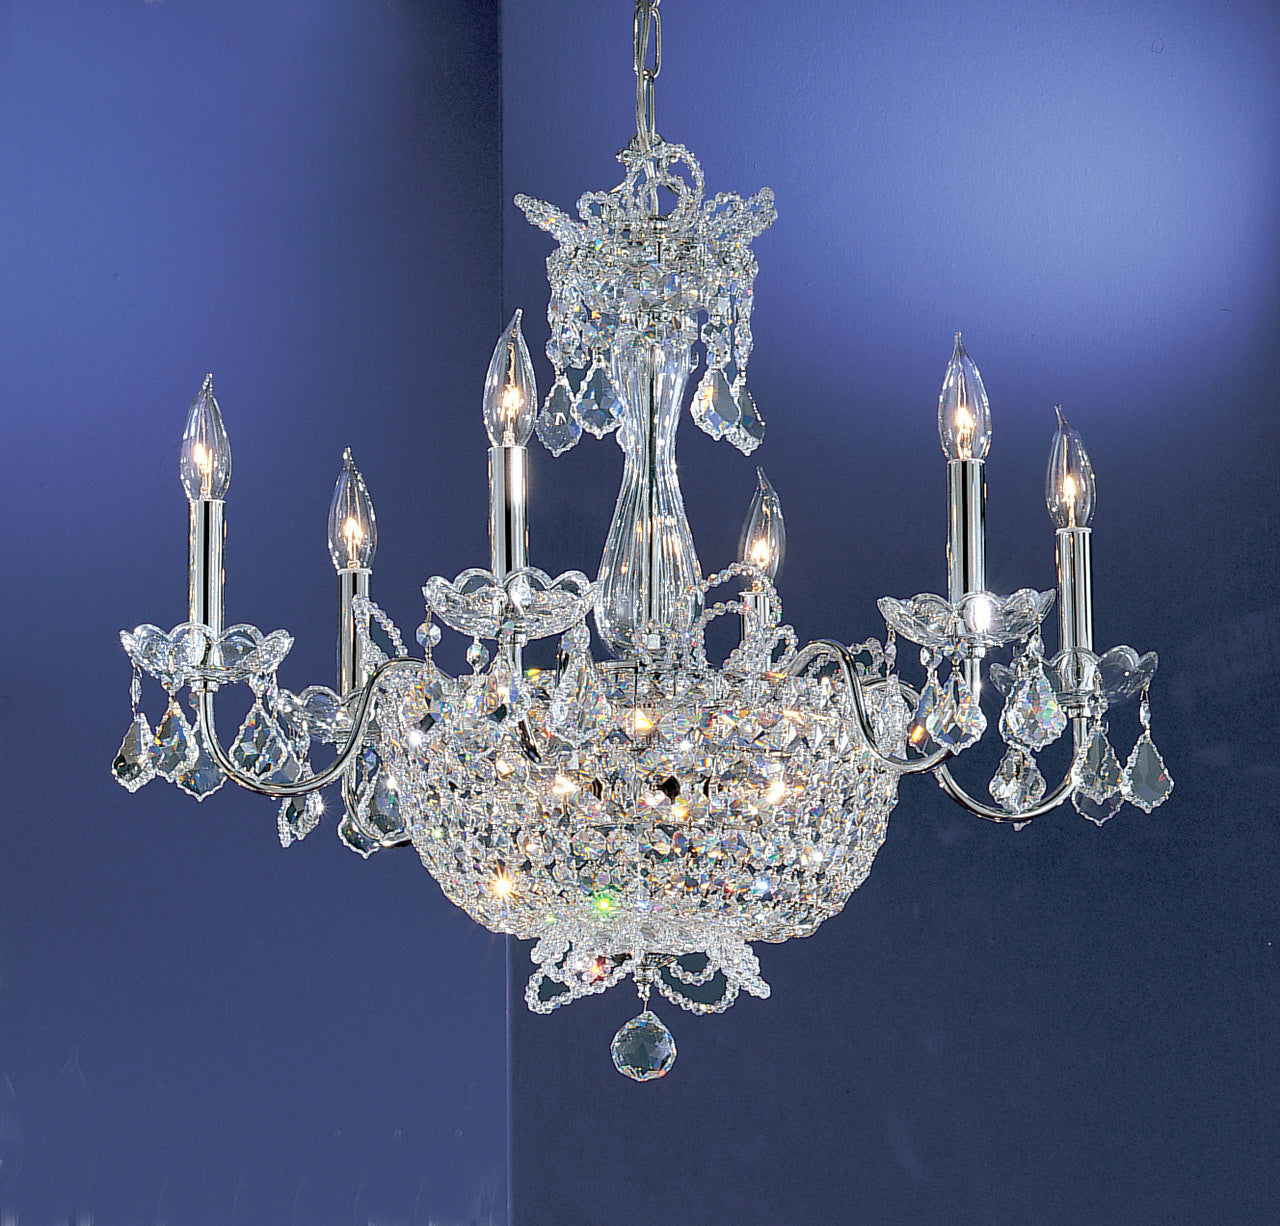 Classic Lighting 69786 CH S Crown Jewels Crystal Chandelier in Chrome